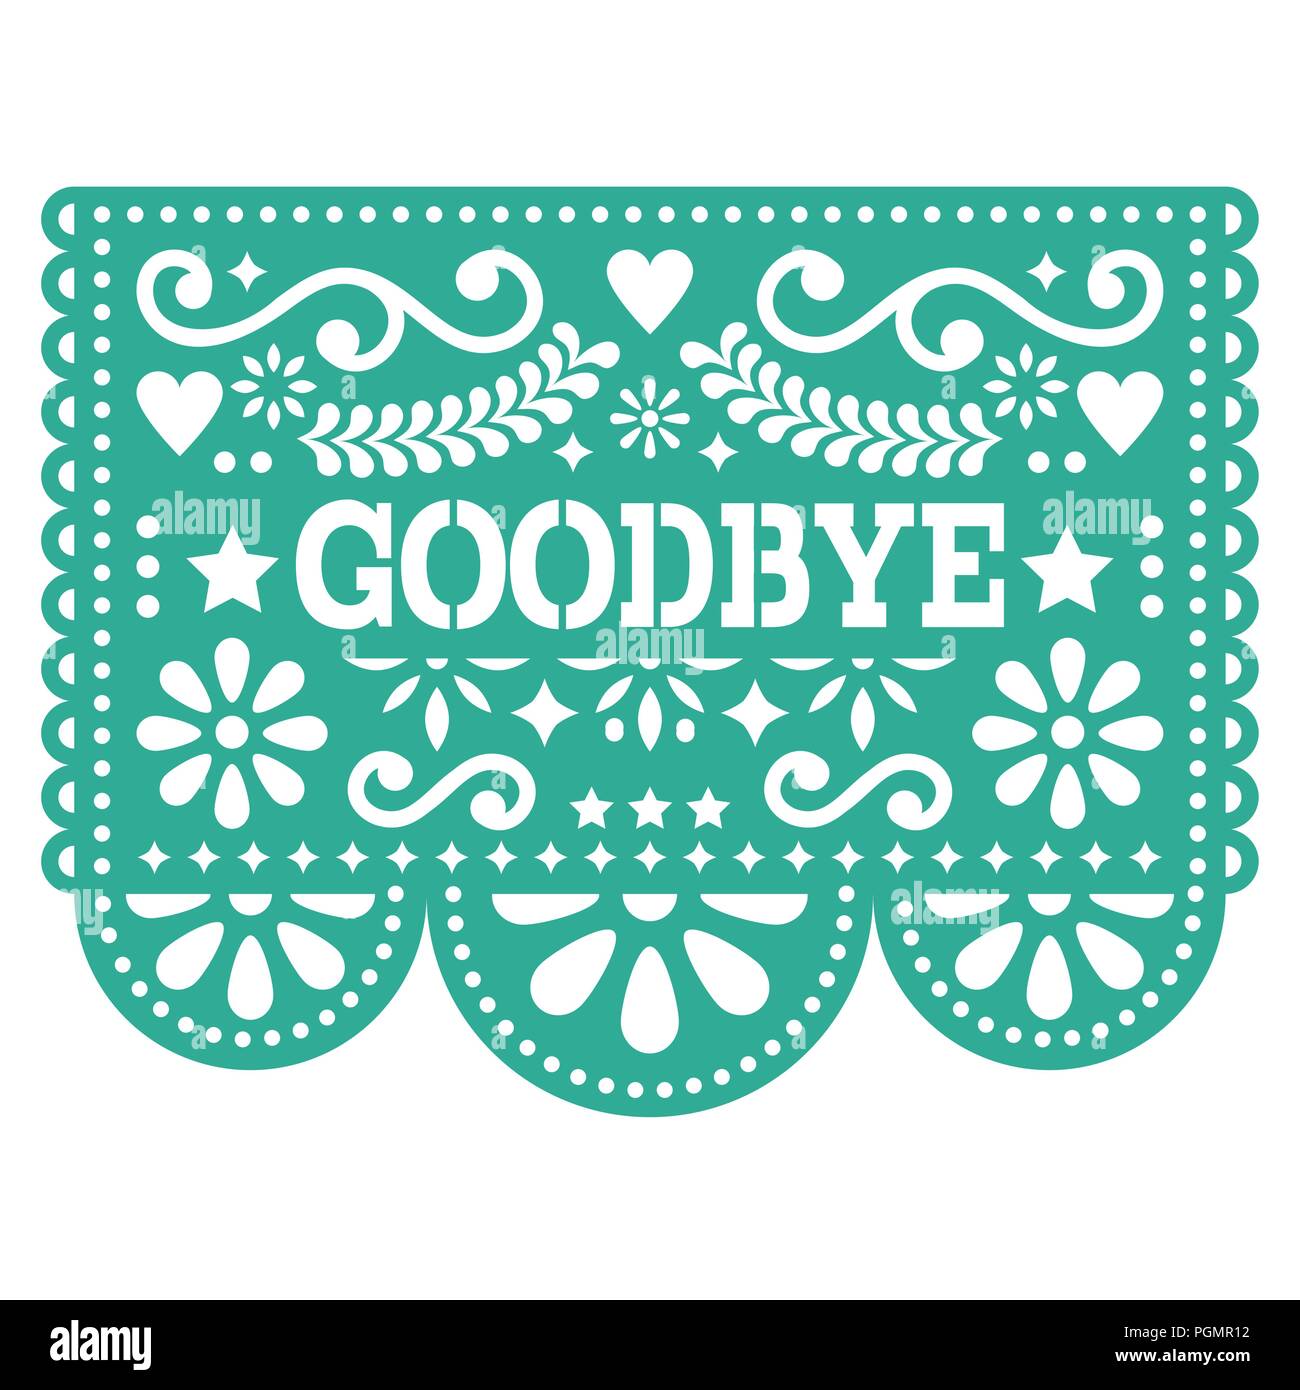 Goodbye Papel Picado vector design or greeting card - party garland paper cut out with flowers and geometric shapes Stock Vector